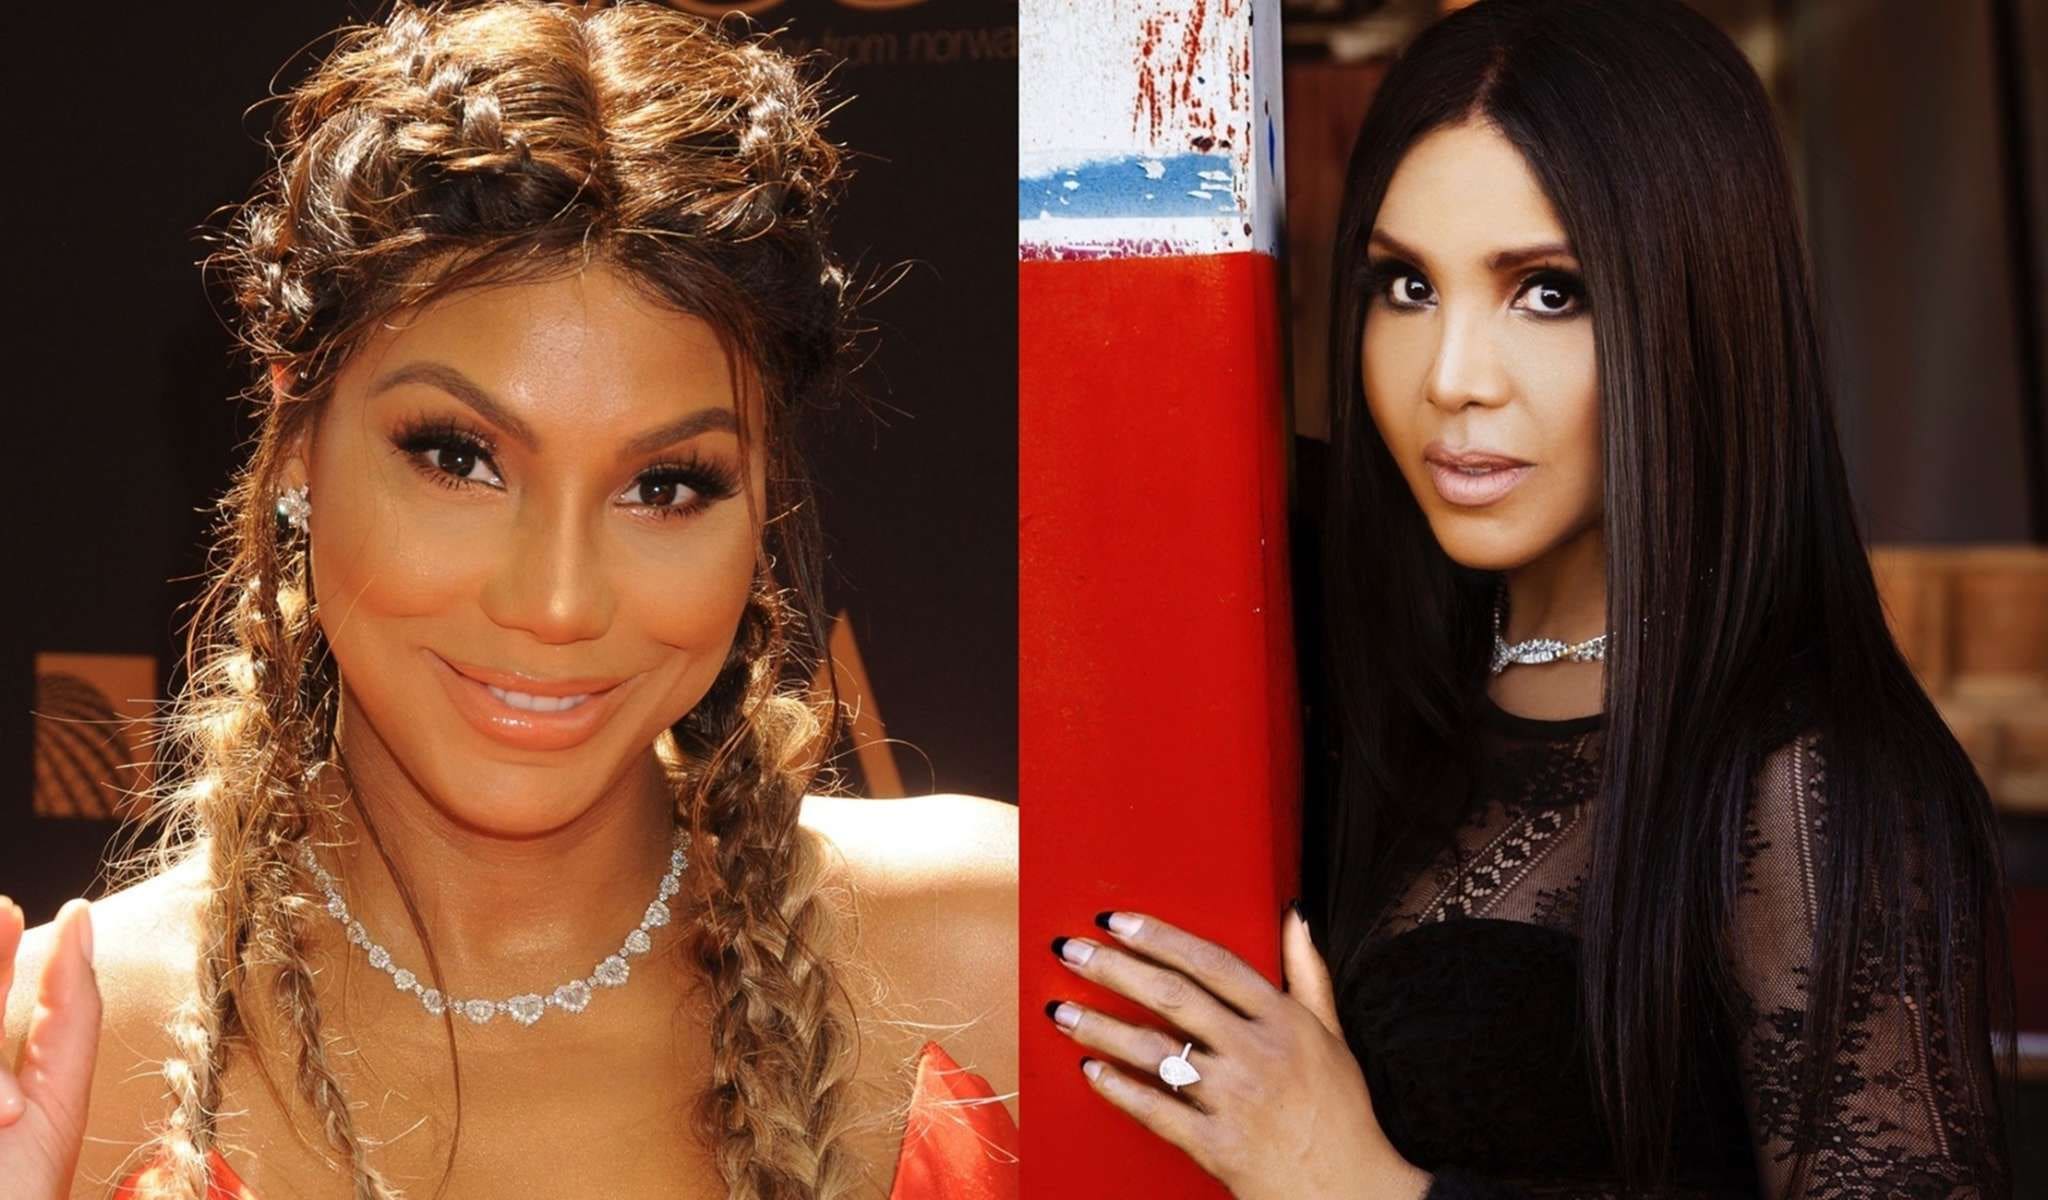 ”tamar-braxton-and-her-sister-toni-braxton-remember-one-of-the-hardest-times-in-their-lives-tiny-harris-is-here-for-them”